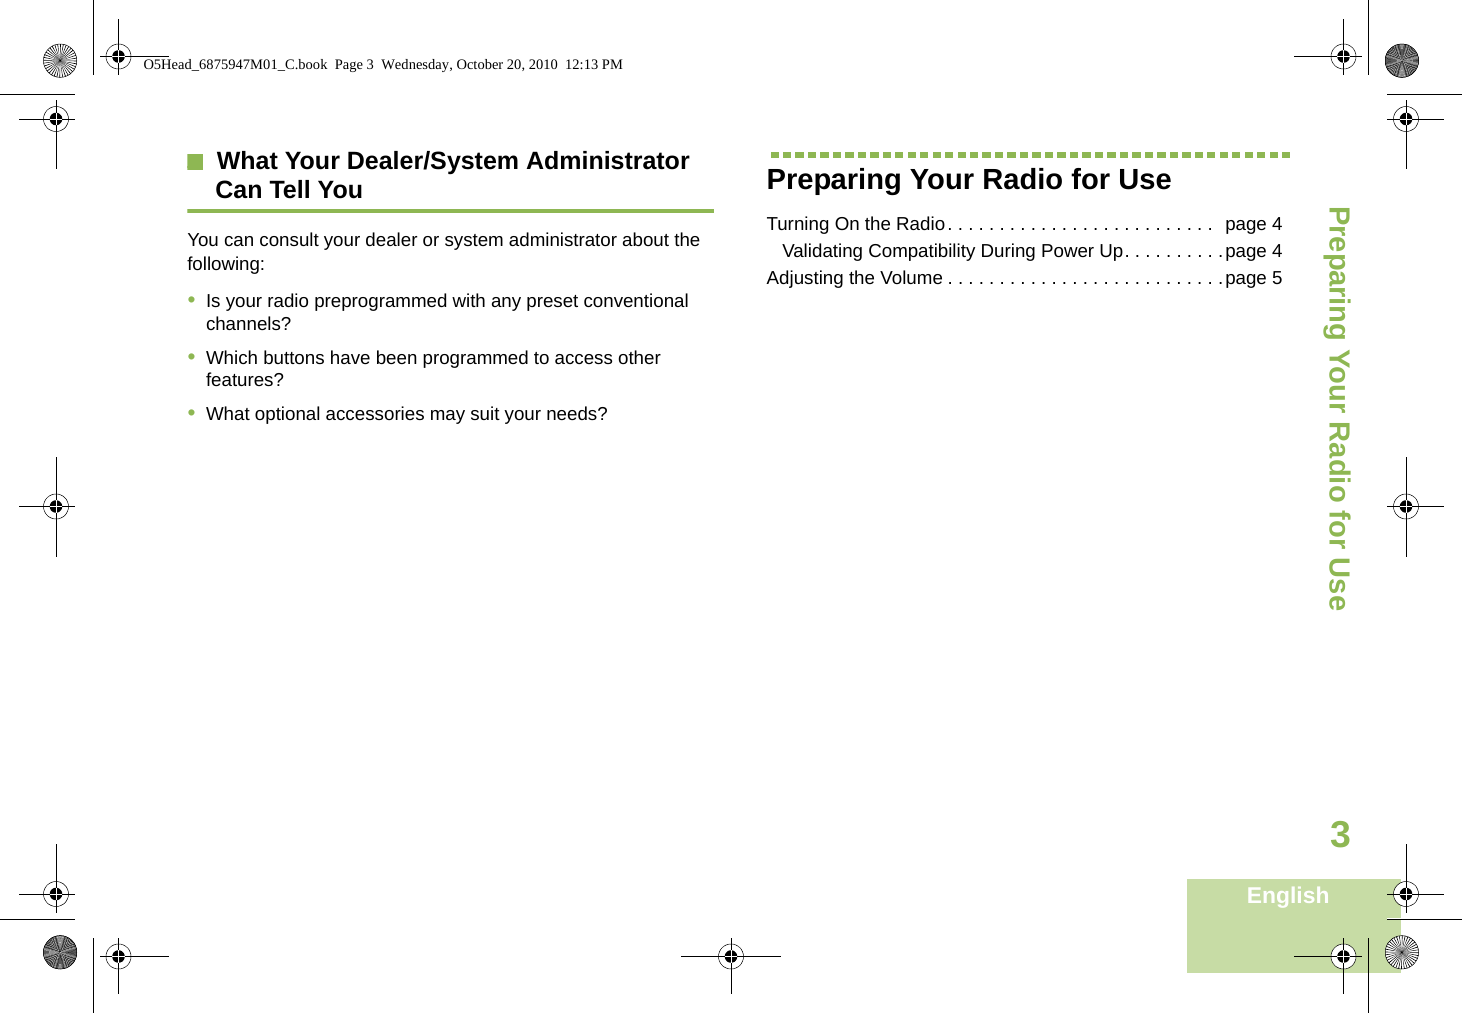 Preparing Your Radio for UseEnglish3What Your Dealer/System Administrator Can Tell YouYou can consult your dealer or system administrator about the following:•Is your radio preprogrammed with any preset conventional channels?•Which buttons have been programmed to access other features? •What optional accessories may suit your needs?Preparing Your Radio for UseTurning On the Radio. . . . . . . . . . . . . . . . . . . . . . . . . .  page 4   Validating Compatibility During Power Up. . . . . . . . . .page 4Adjusting the Volume . . . . . . . . . . . . . . . . . . . . . . . . . . .page 5O5Head_6875947M01_C.book  Page 3  Wednesday, October 20, 2010  12:13 PM